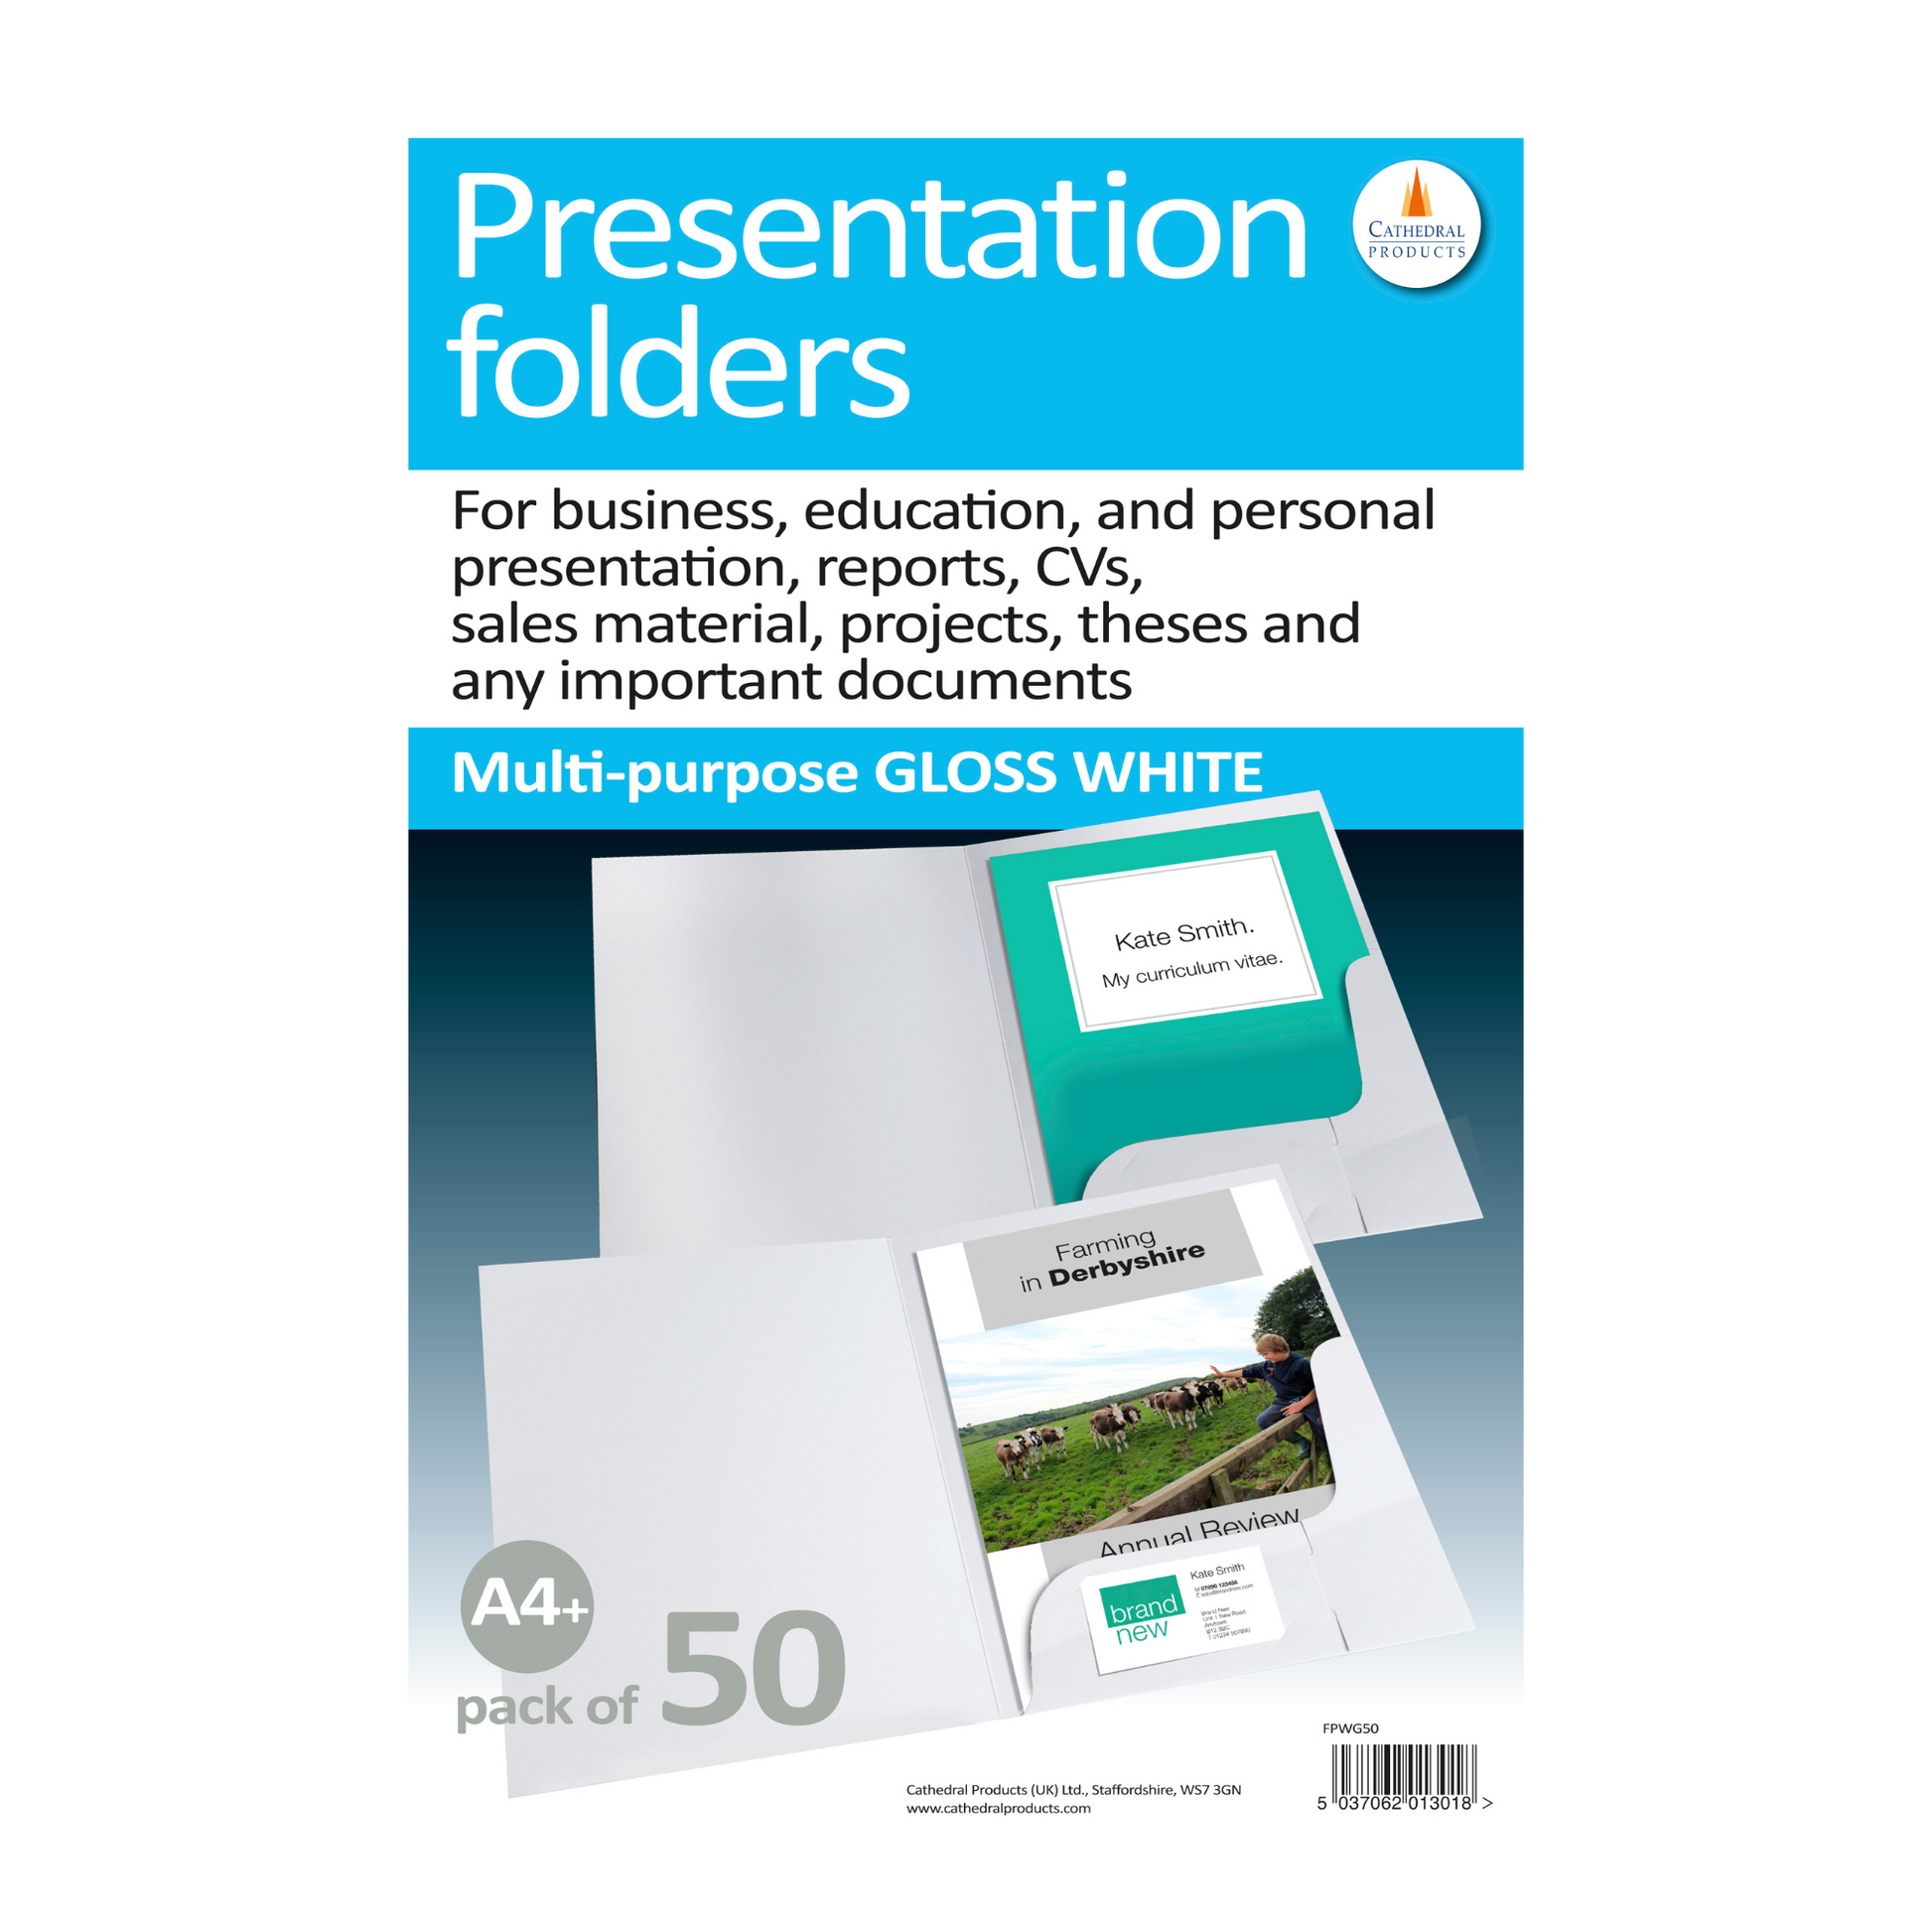 Printing on the box of a pack of 50 Cathedral Products A4 sized Presentation Folders, showcasing the multi-purpose gloss white folders with a business card holder. The text emphasizes their use for business, education, and personal presentation needs.